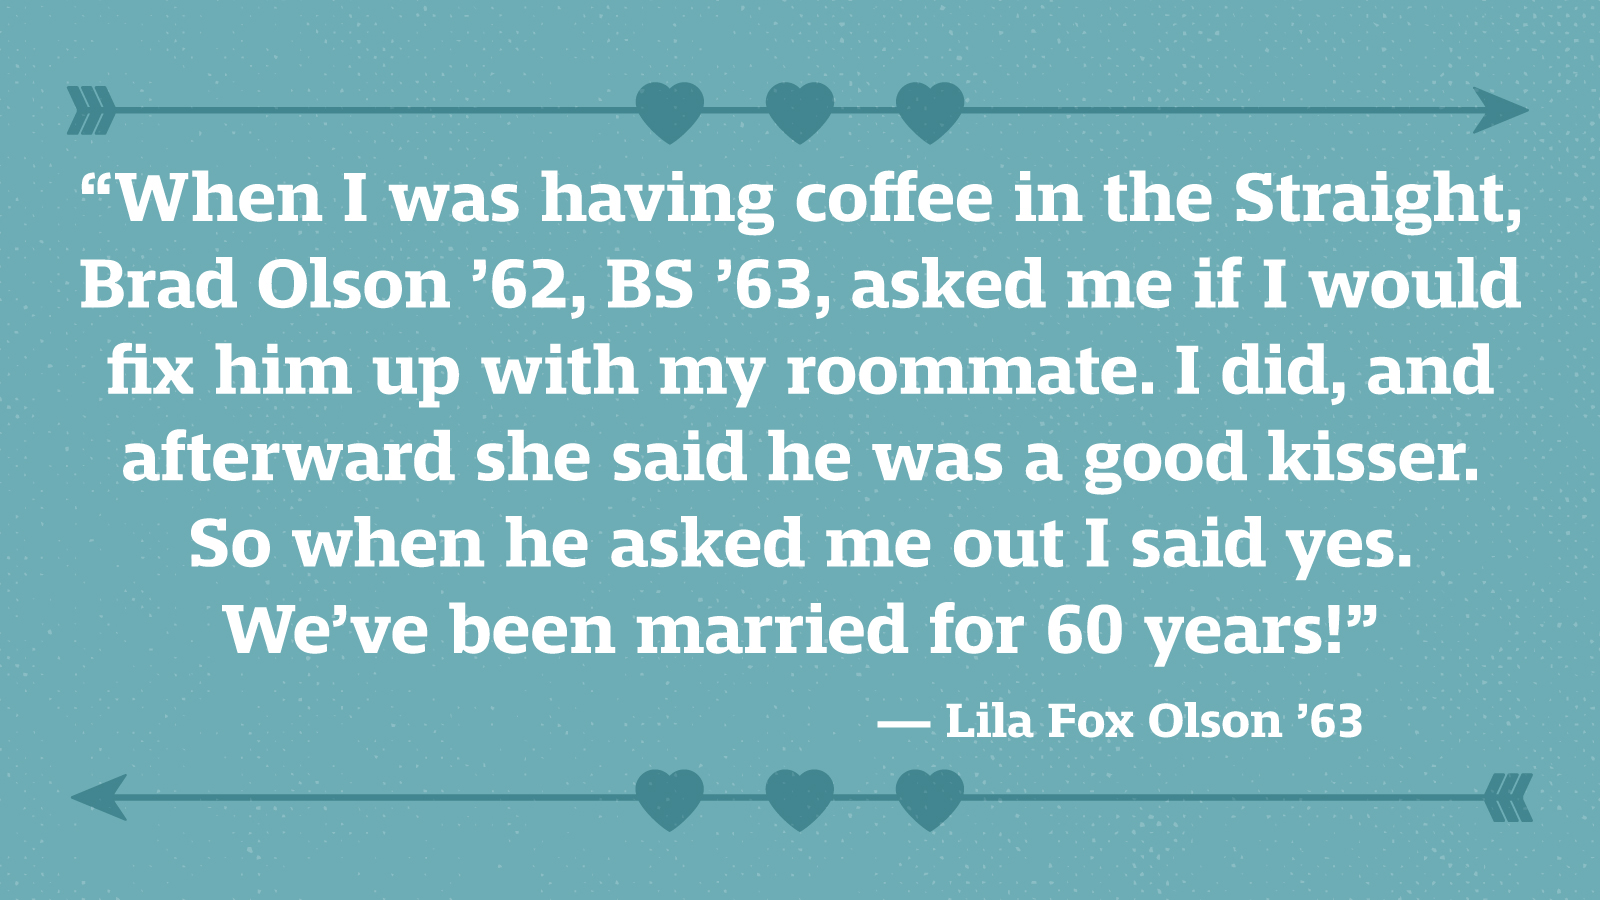 “When I was having coffee in the Straight, Brad Olson ’62, BS ’63, asked me if I would fix him up with my roommate. I did, and afterward she said he was a good kisser. So when he asked me out I said yes. We’ve been married for 60 years!” — Lila Fox Olson ’63